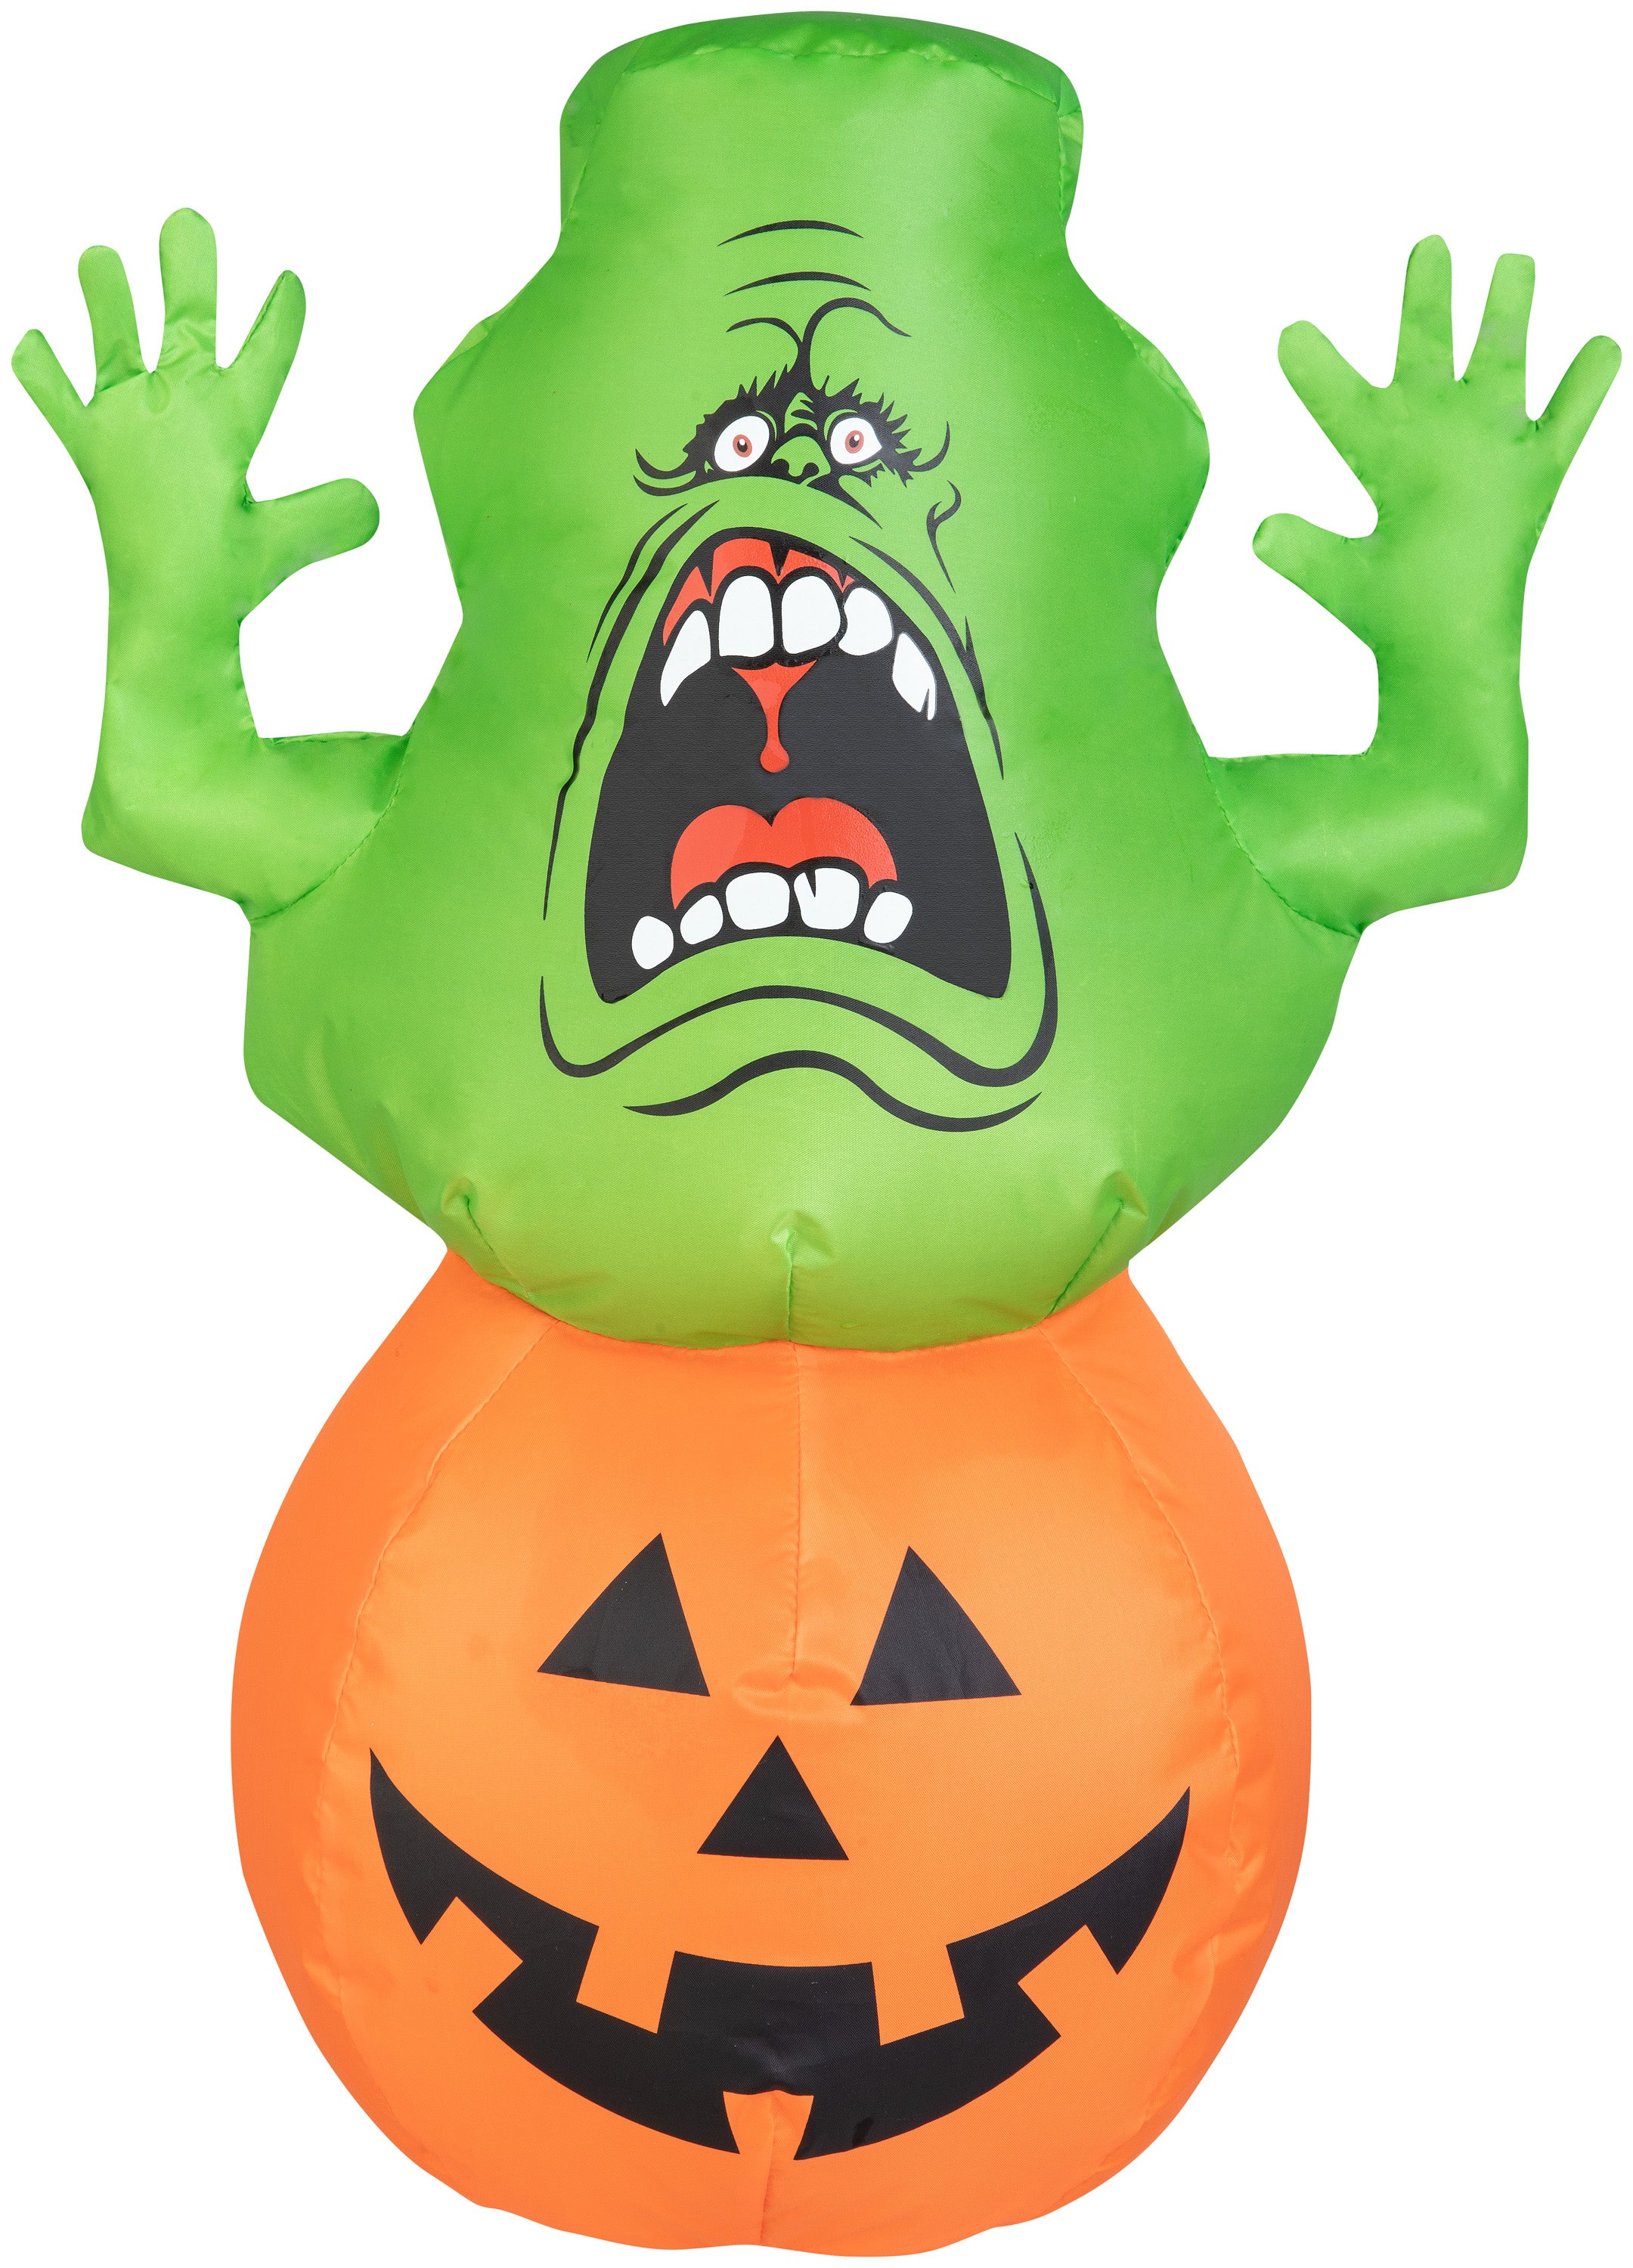 Gemmy Airdorable Airblown Slimer Ghostbusters, 1.5 ft Tall, green